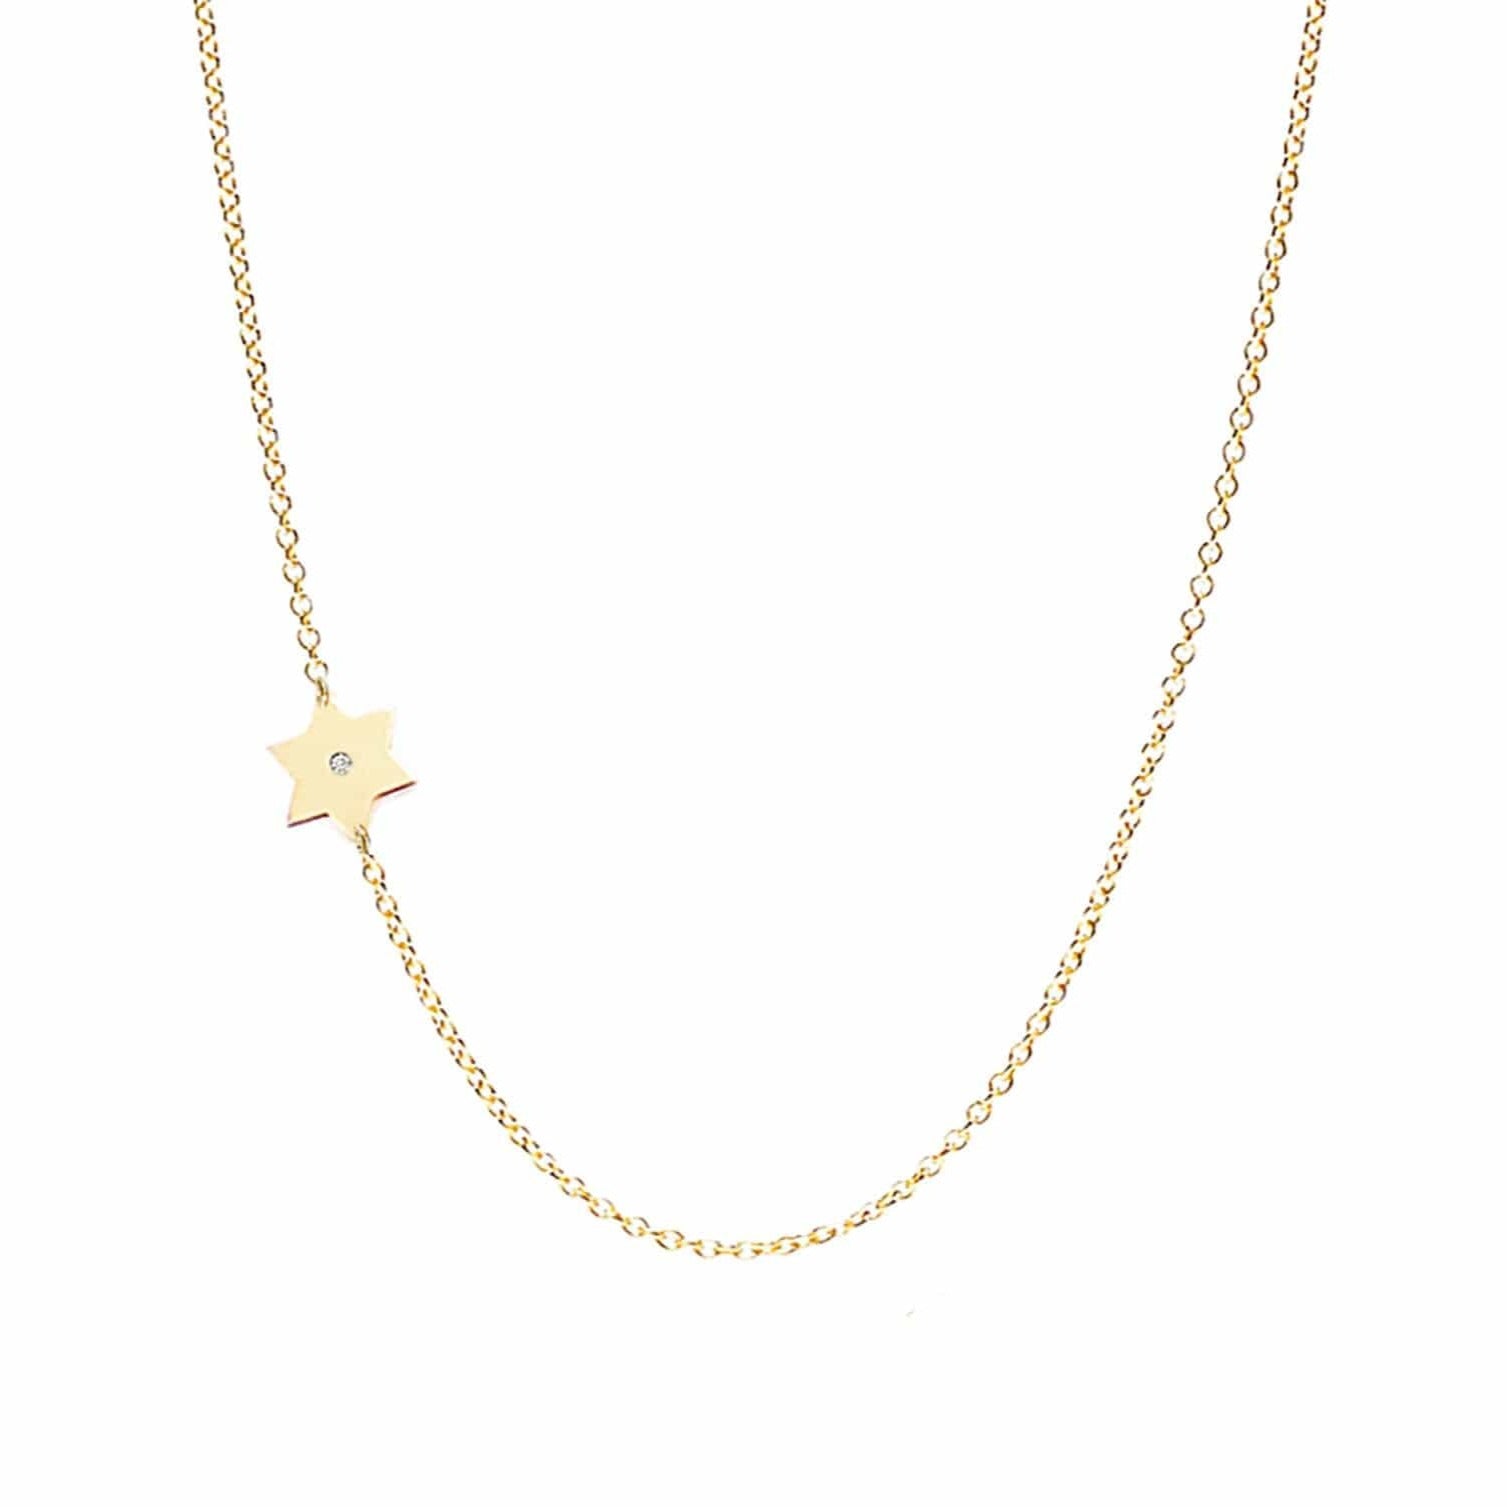 Tiny Jewish Star of David Necklace - Sterling Silver or Gold